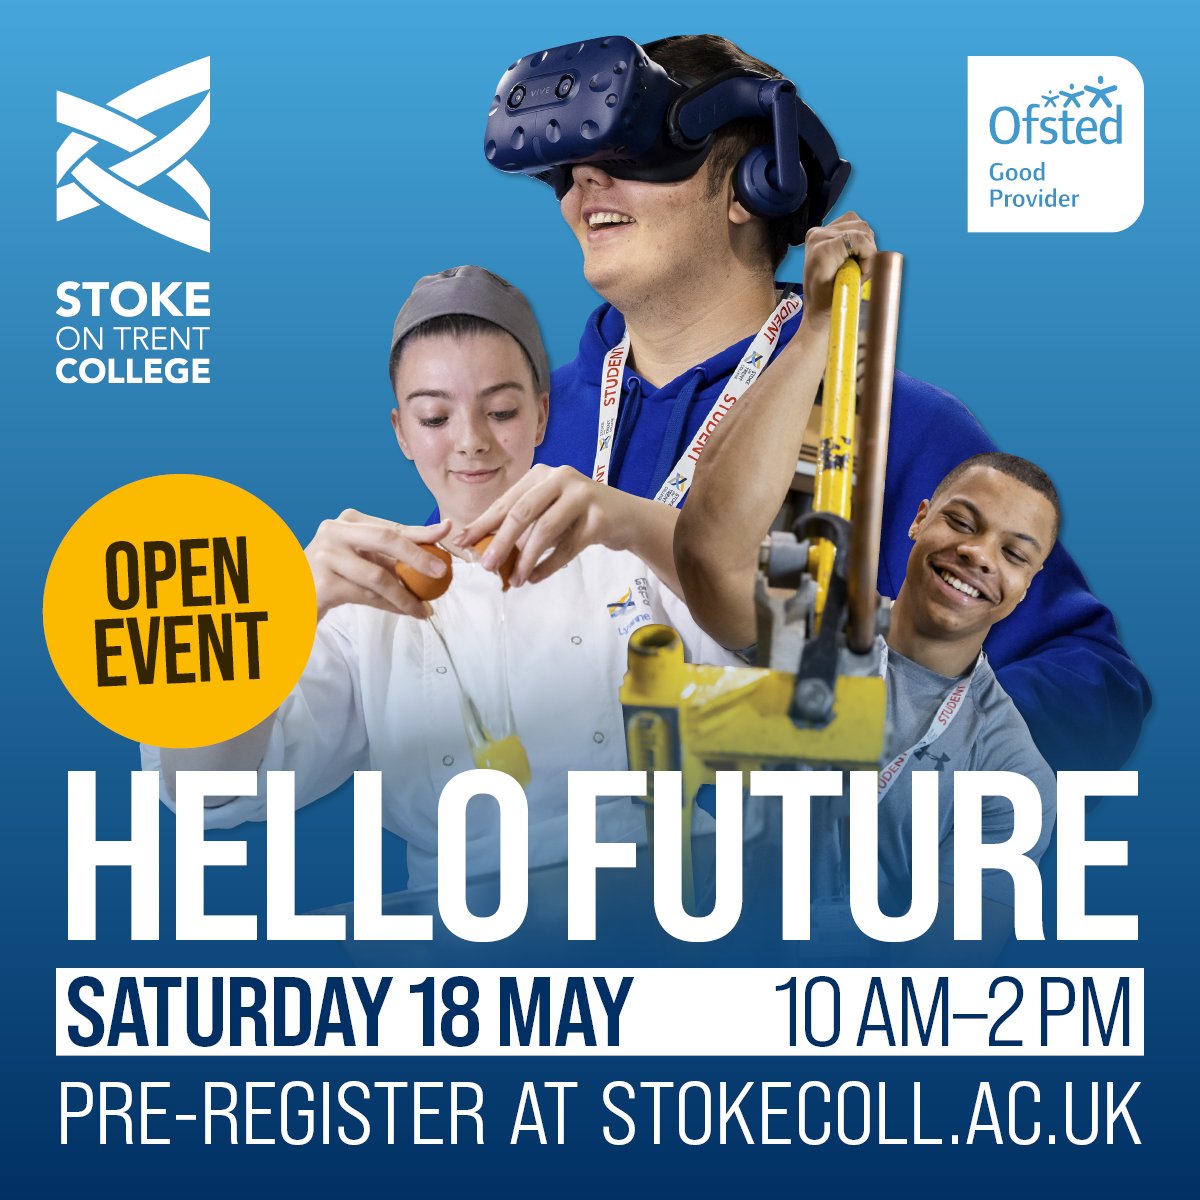 Our next 𝙤𝙥𝙚𝙣 𝙚𝙫𝙚𝙣𝙩 is fast approaching... Speak with staff and students, tour our ultra-modern facilities and discover the life-changing enrichment opportunities on offer, including a once-in-a-lifetime trip to South Africa! Pre-register 👉 stokecoll.ac.uk/open-events